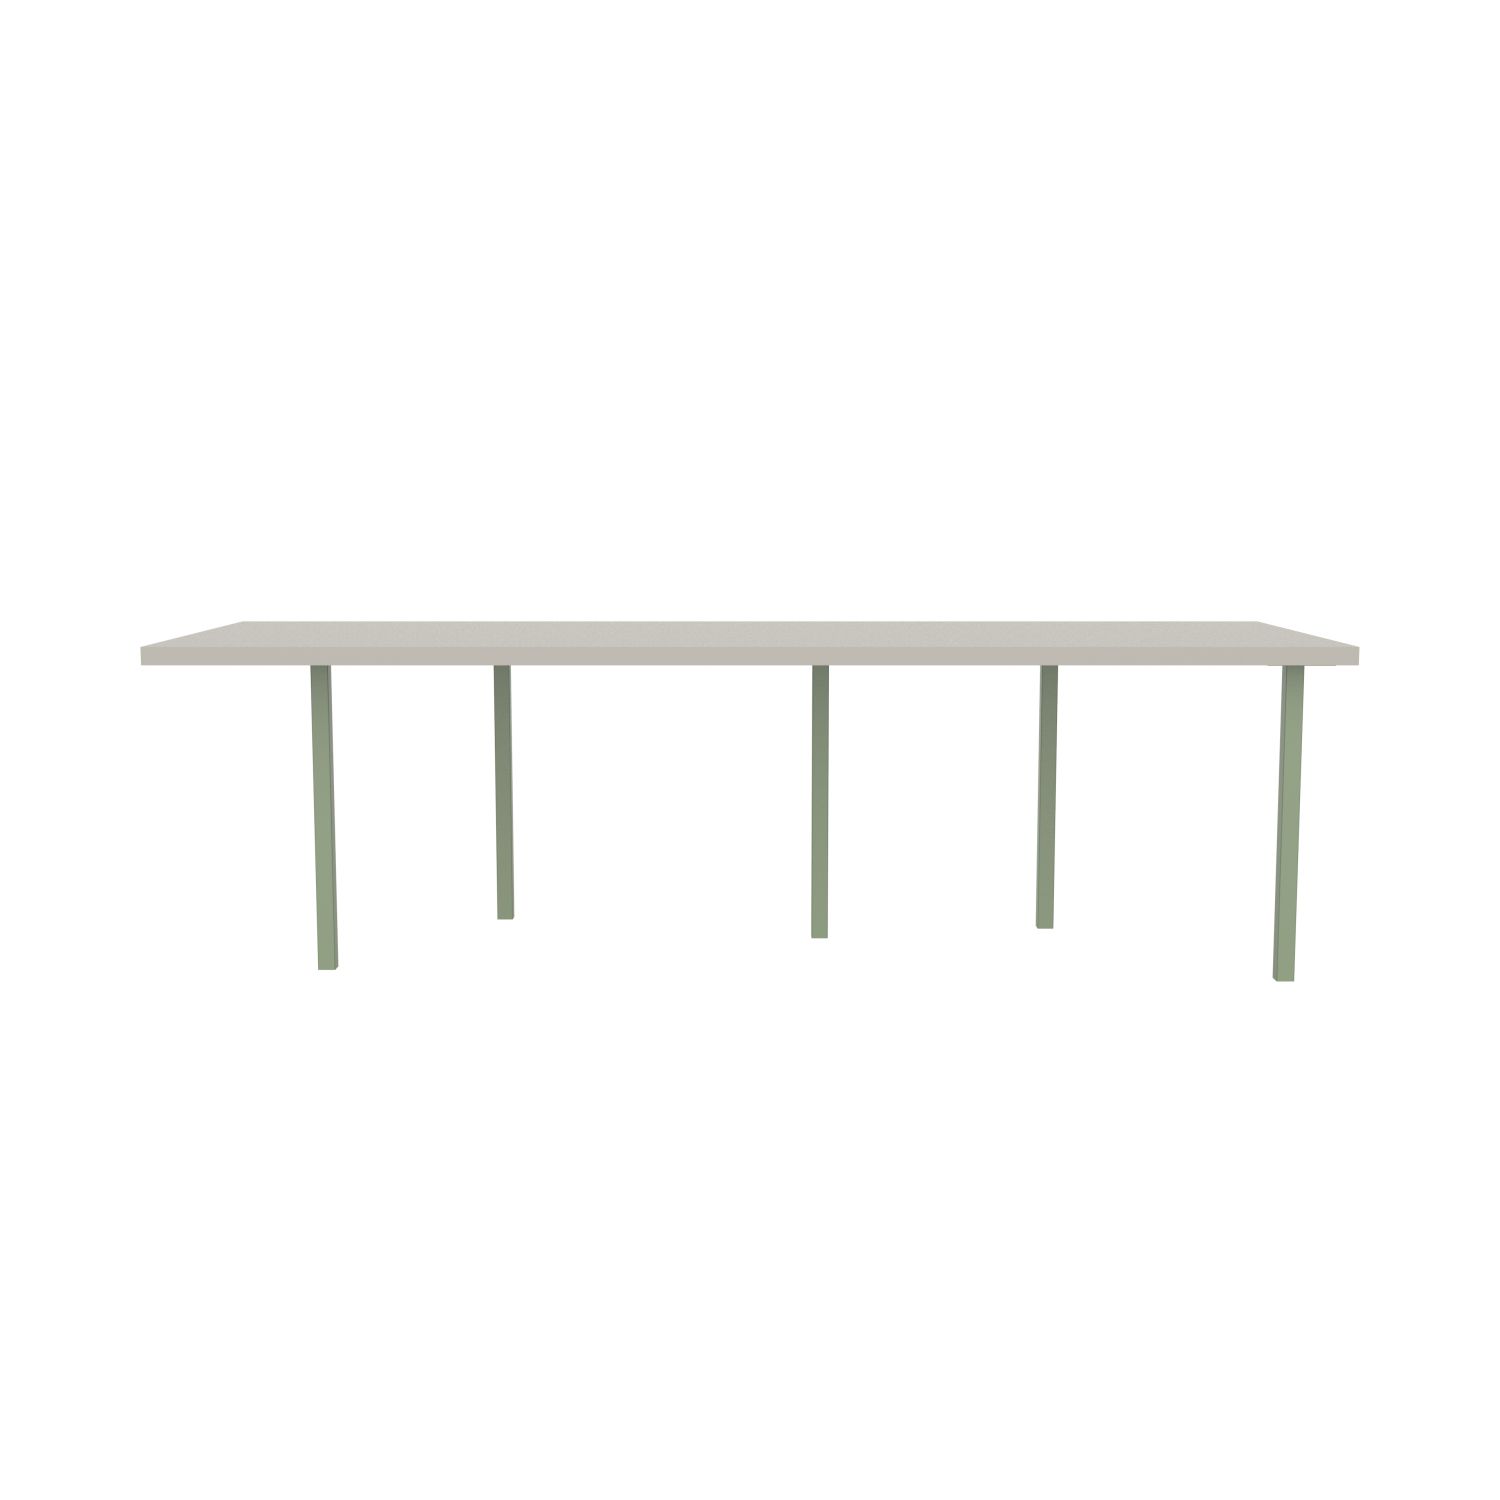 lensvelt bbrand table five fixed heigt 915x264 hpl white 50 mm price level 1 green ral6021